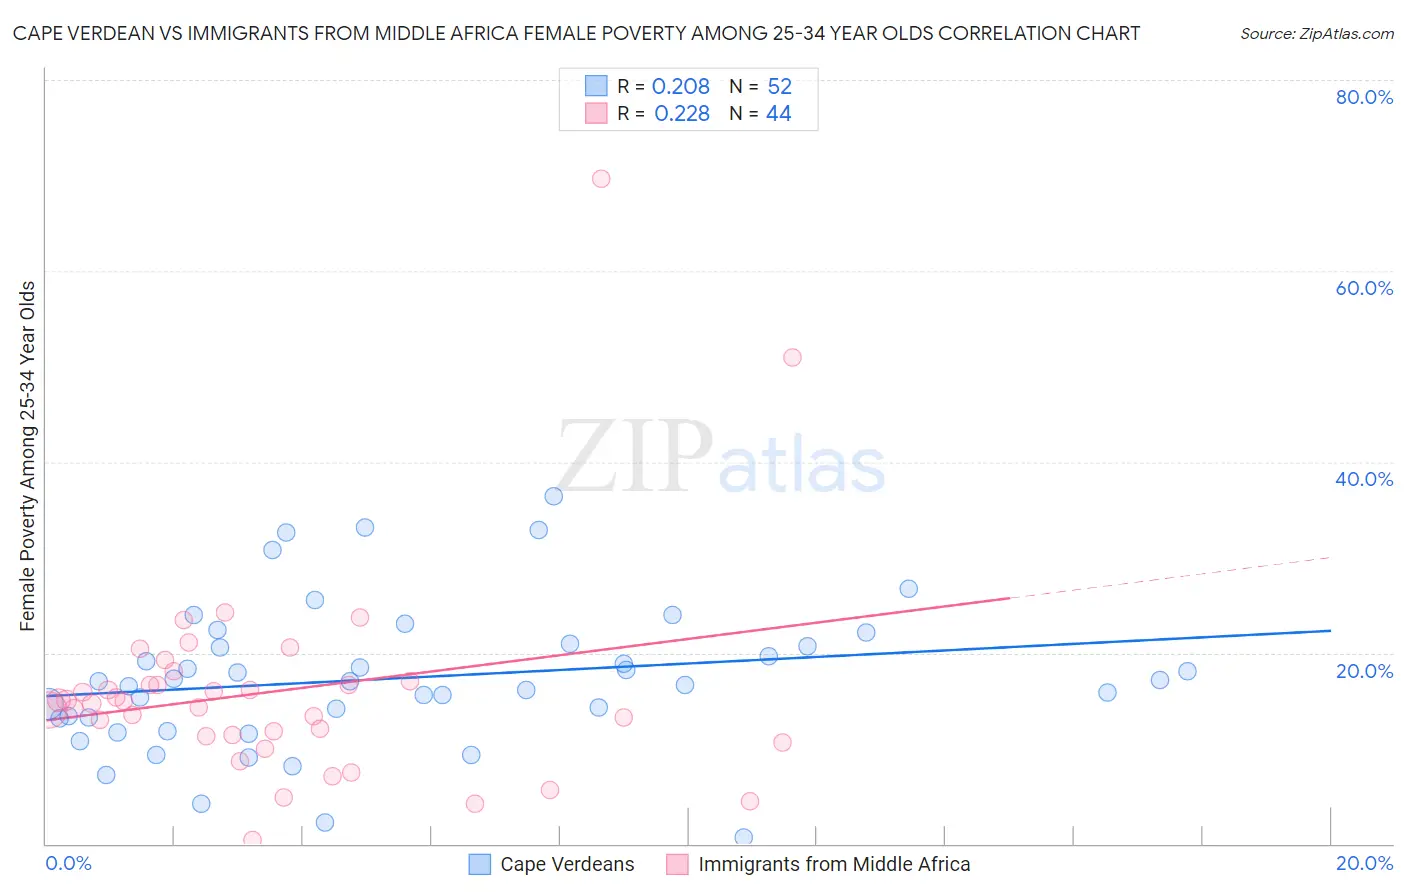 Cape Verdean vs Immigrants from Middle Africa Female Poverty Among 25-34 Year Olds